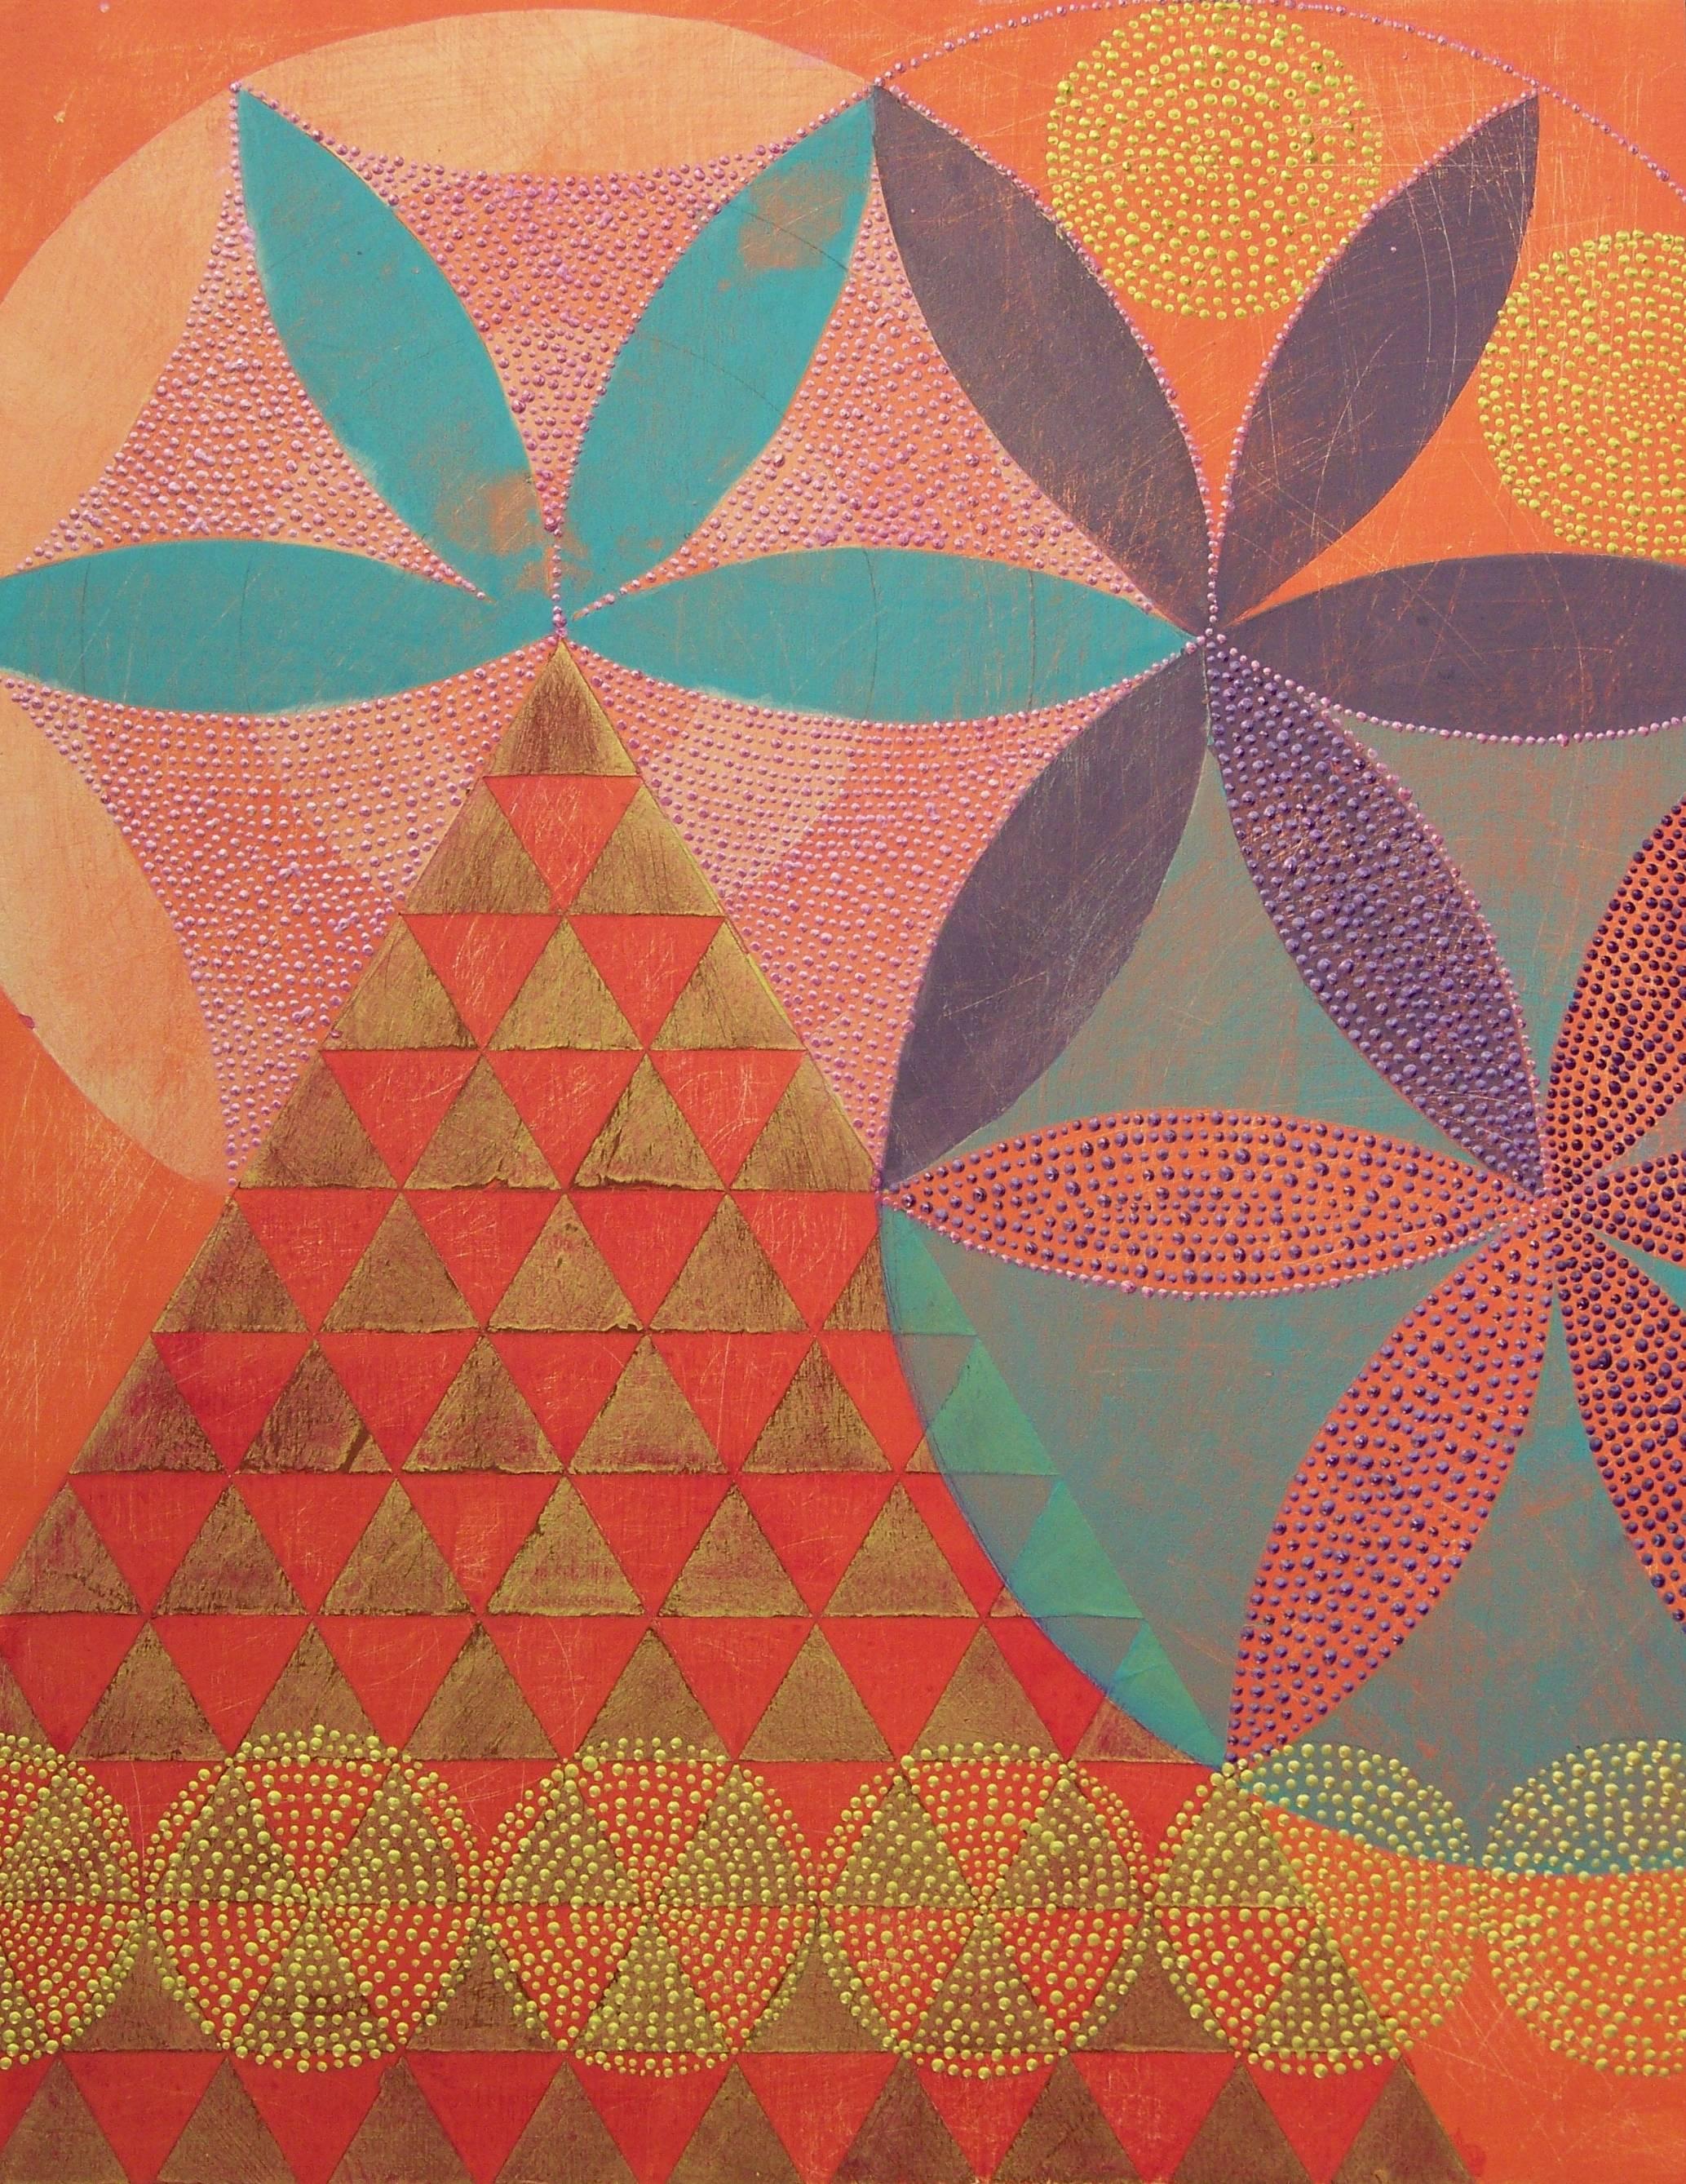 "Triangles 5", abstract, geometric, coral, gold, violet, teal, acrylic painting